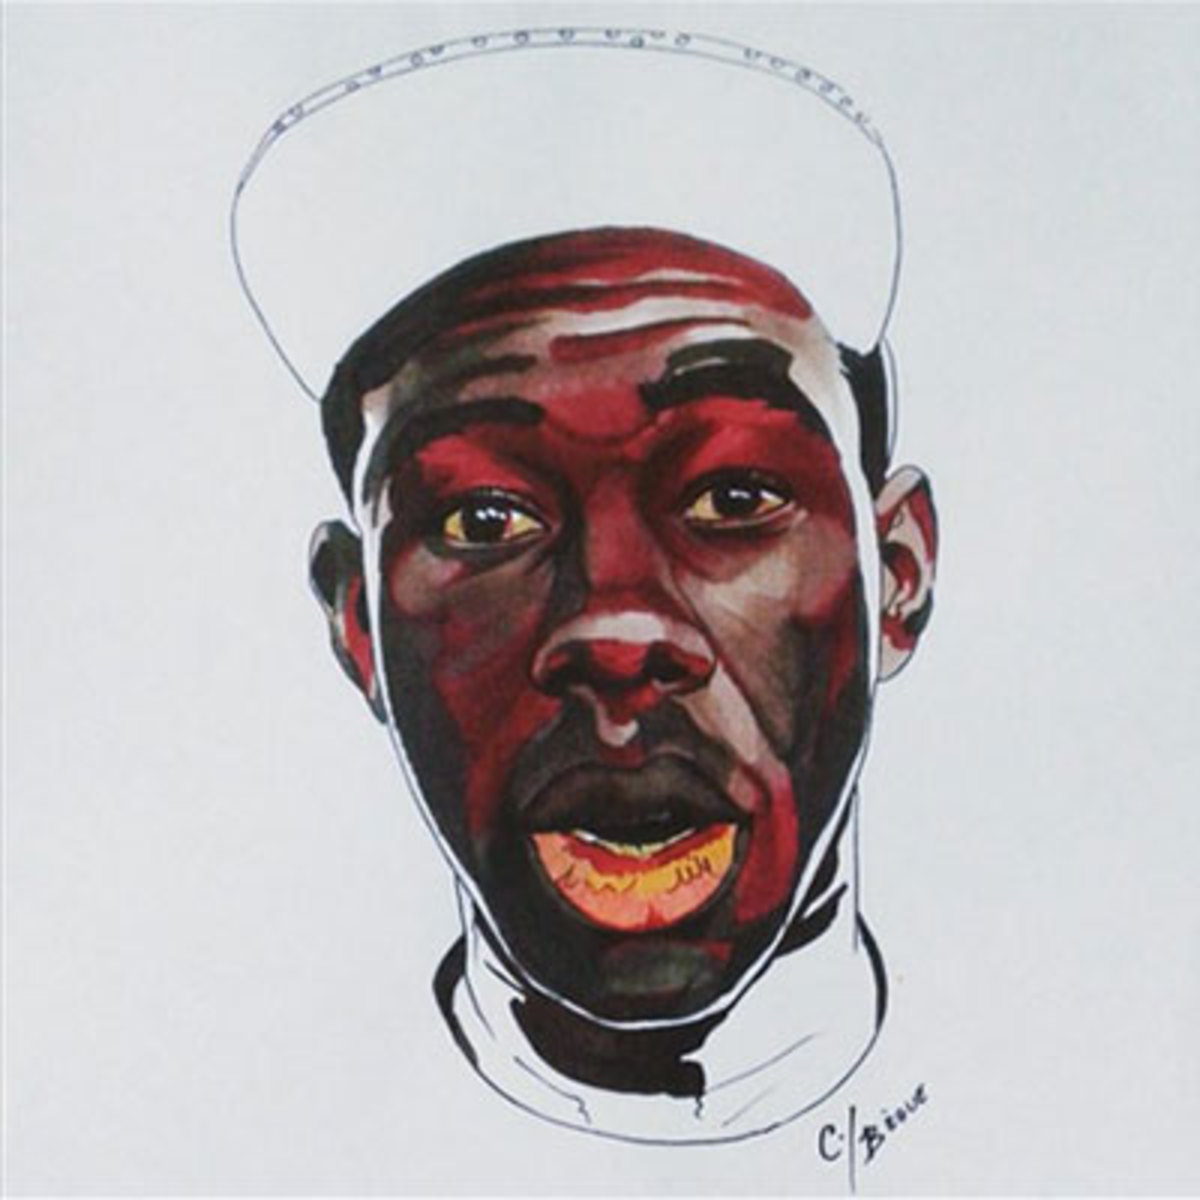 Tyler, The Creator Says He's Banned From U.K. Because of Song Lyrics - DJBooth1200 x 1200